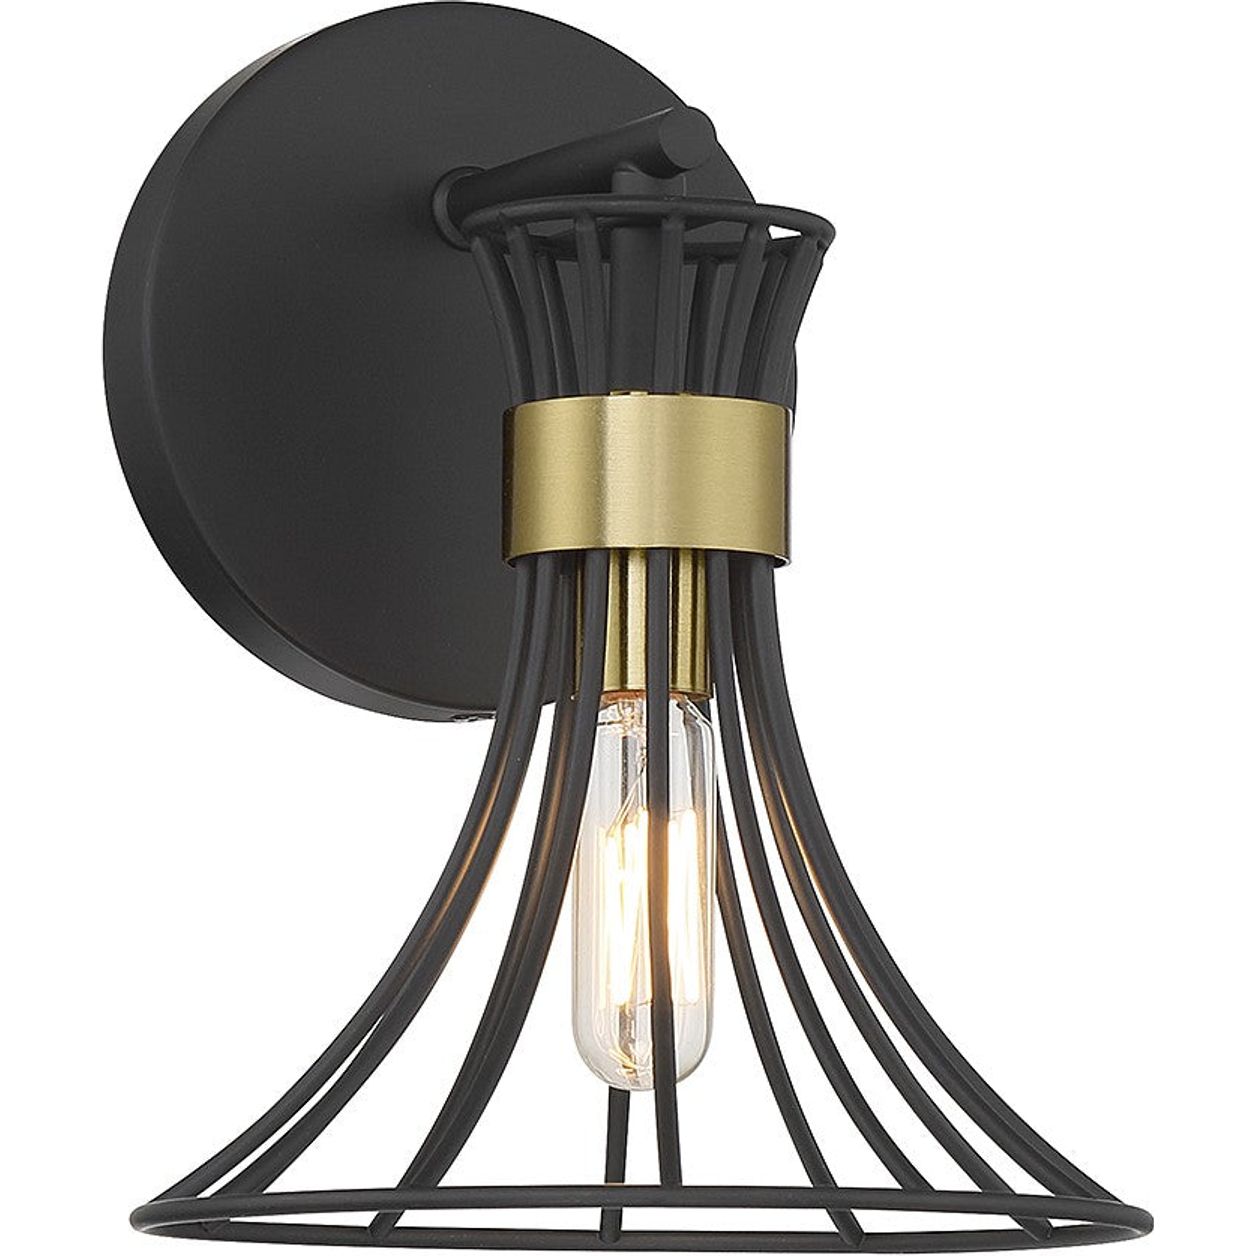 Savoy House - 9-6080-1-143 - One Light Wall Sconce - Breur - Matte Black with Warm Brass